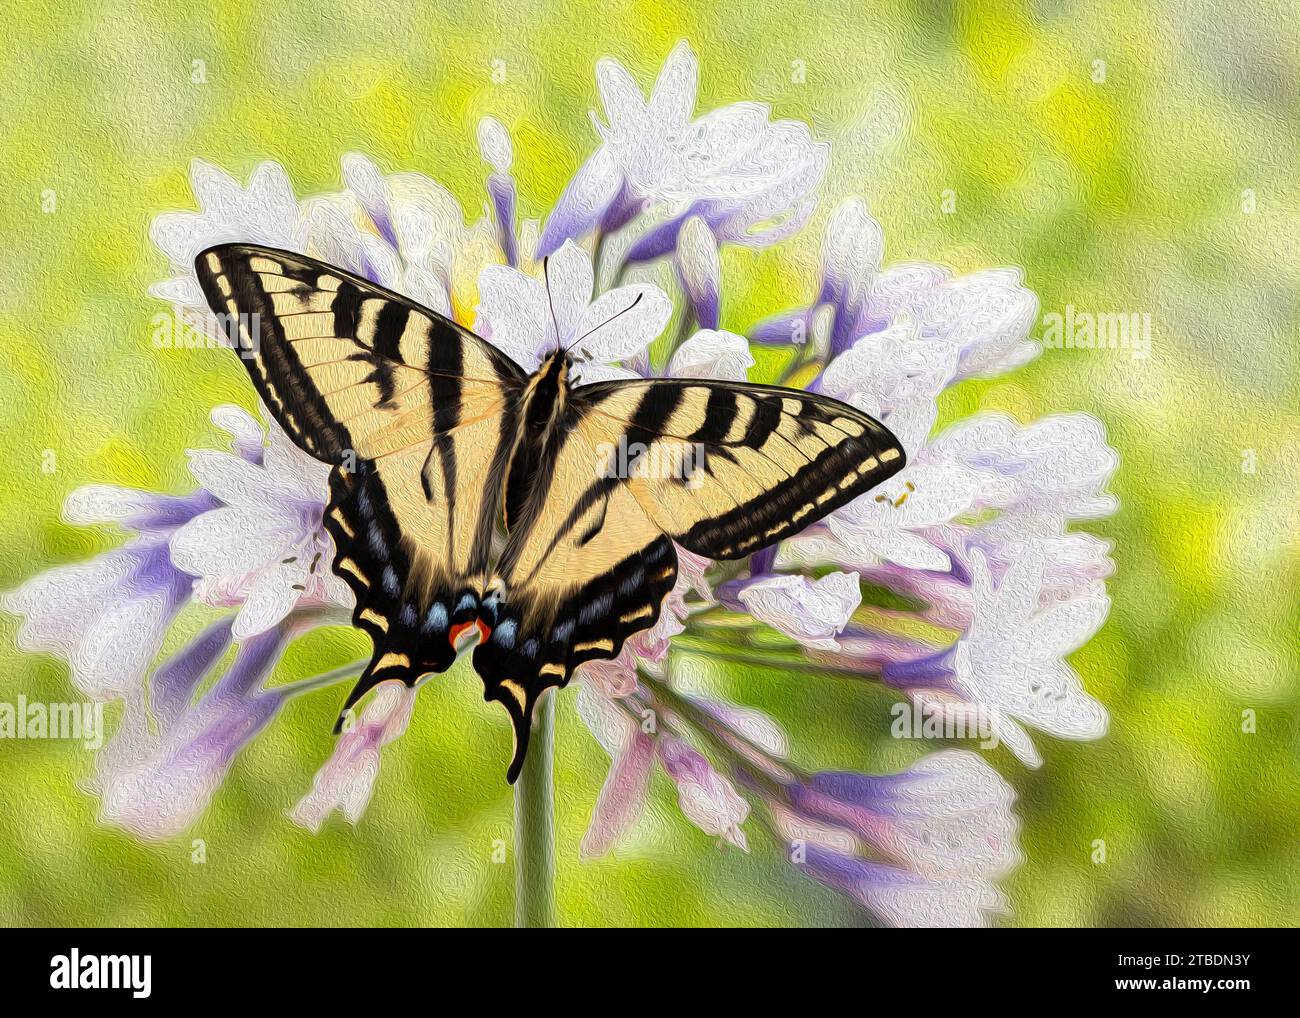 Macro of a Western tiger swallowtail butterfly (papilio rutulus) feeding on an agapanthus flower. Top view with wings spread open. Oil paint effect. Stock Photo